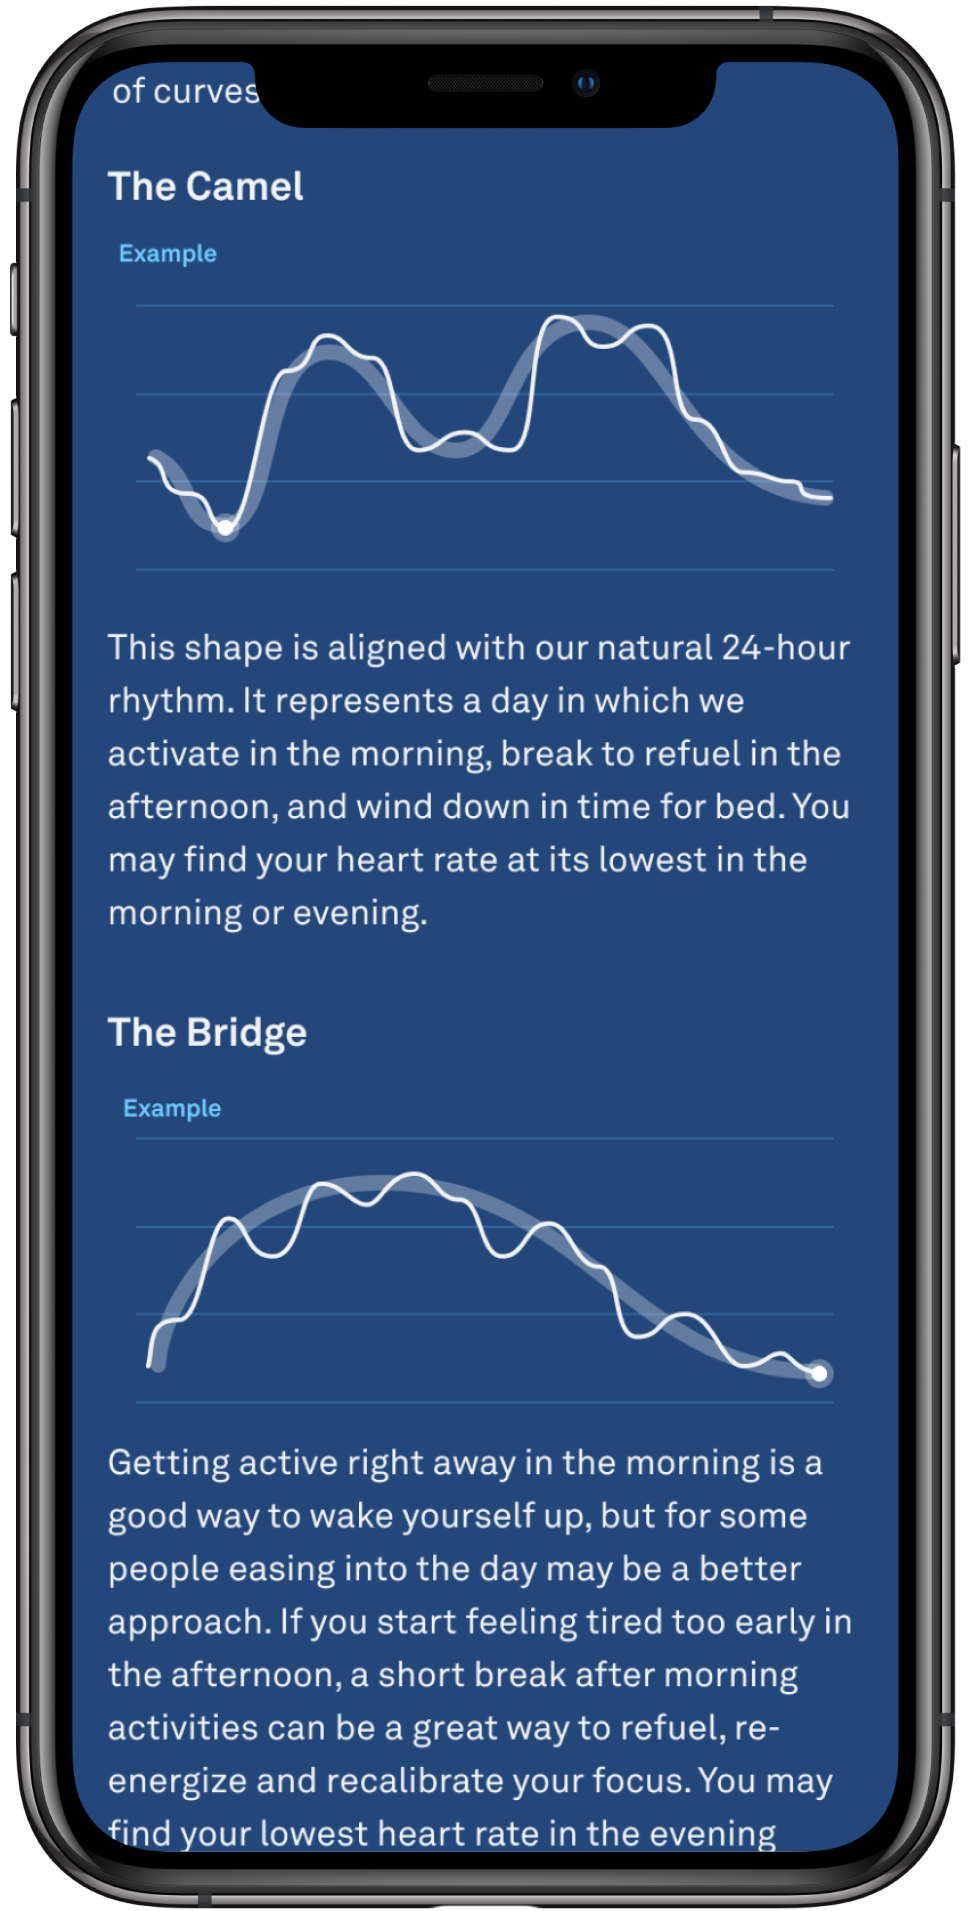 a screenshot of the app showing examples of the camel and the bridge heart rate curves